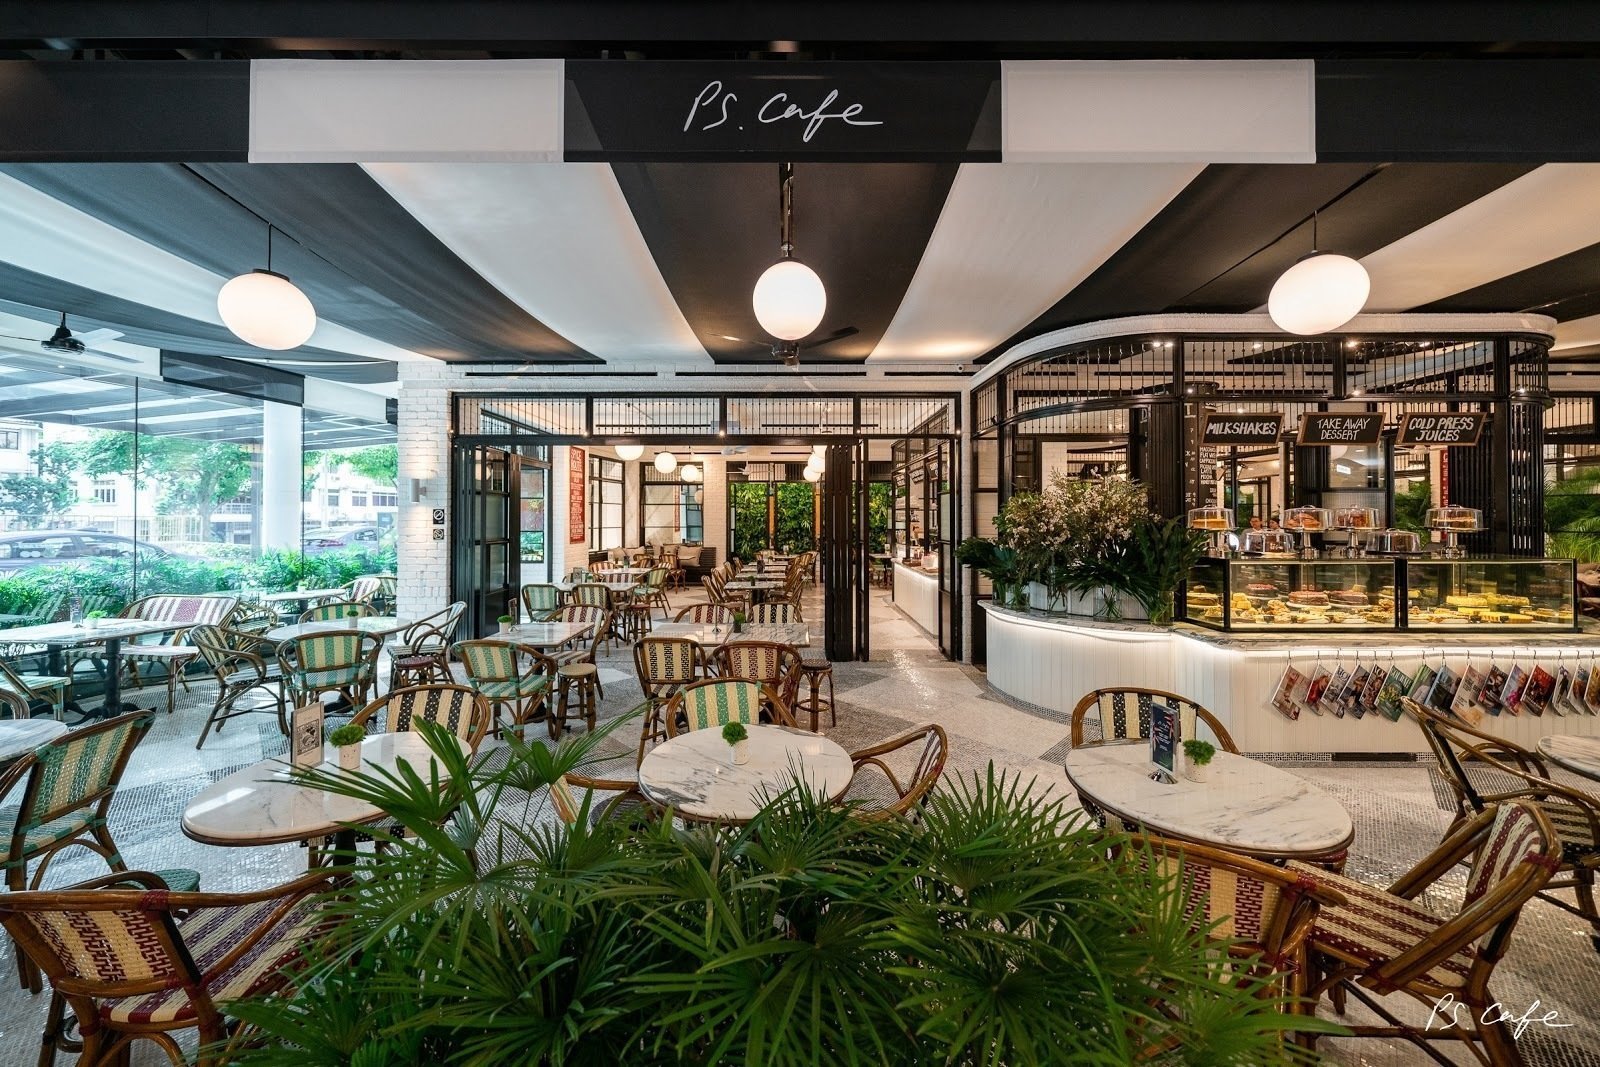 <span class="translation_missing" title="translation missing: en.meta.location_title, location_name: PS.Cafe @ Great World, city: Singapore">Location Title</span>